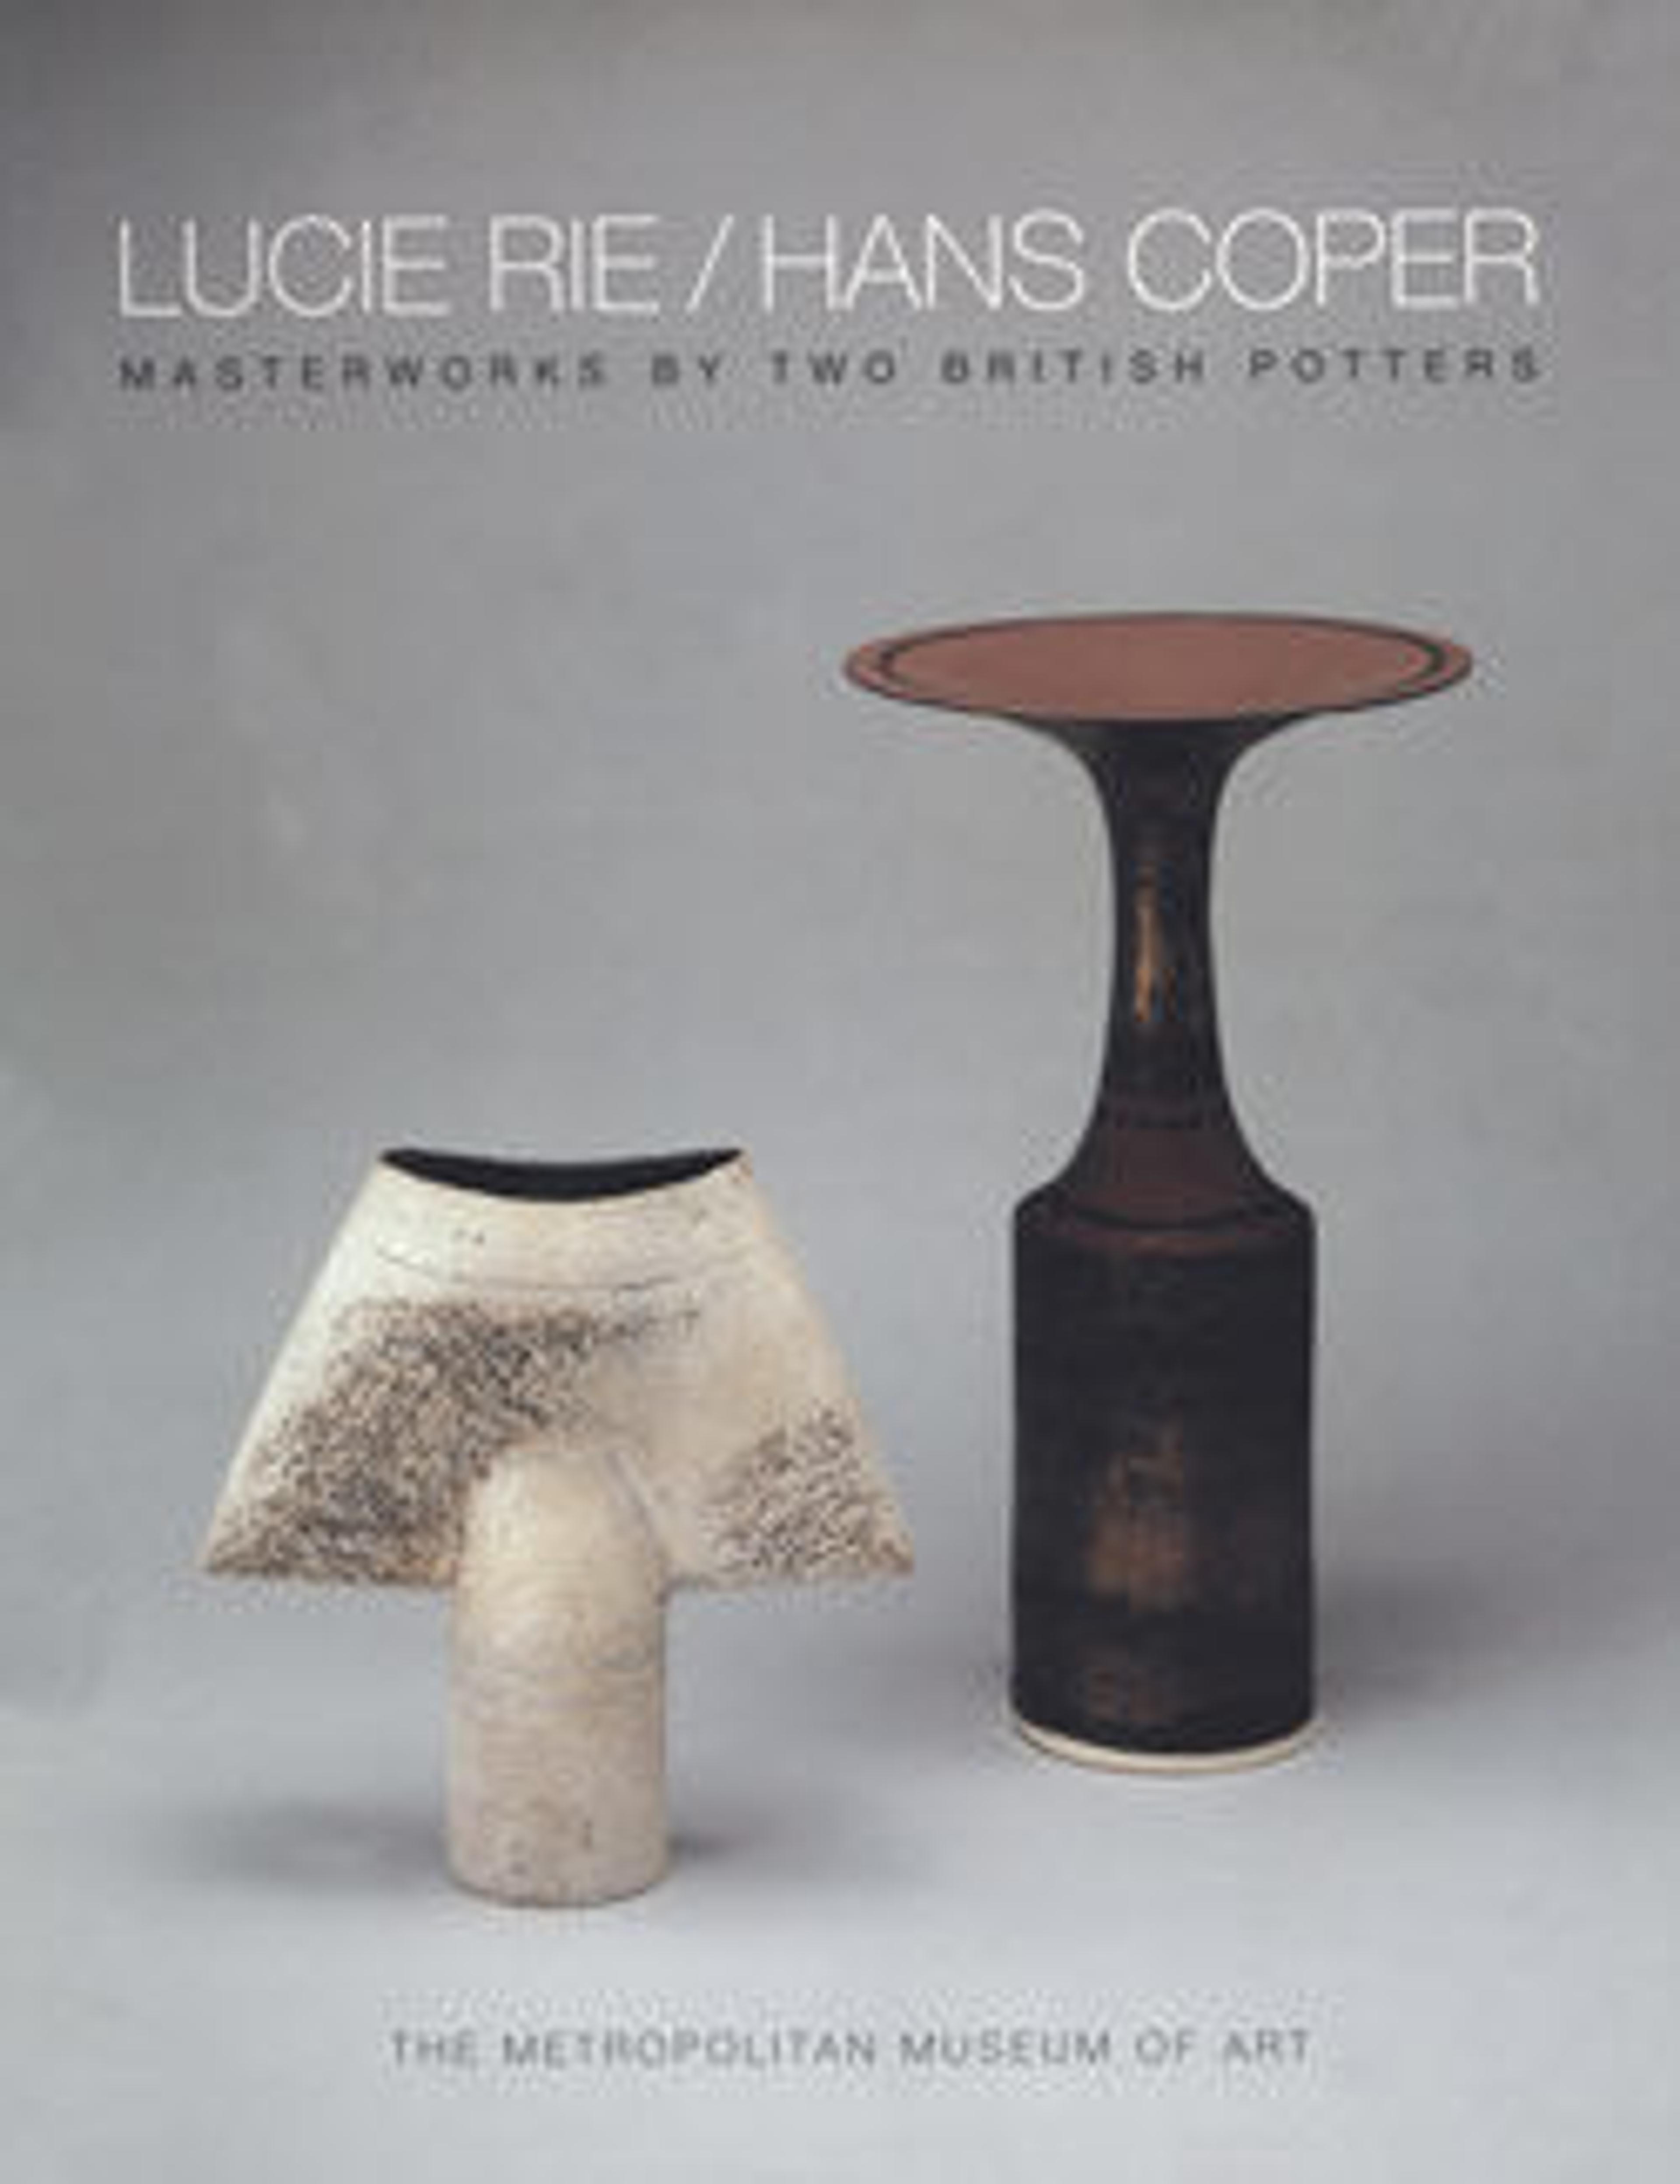 Lucie Rie/Hans Coper: Masterworks by Two British Potters